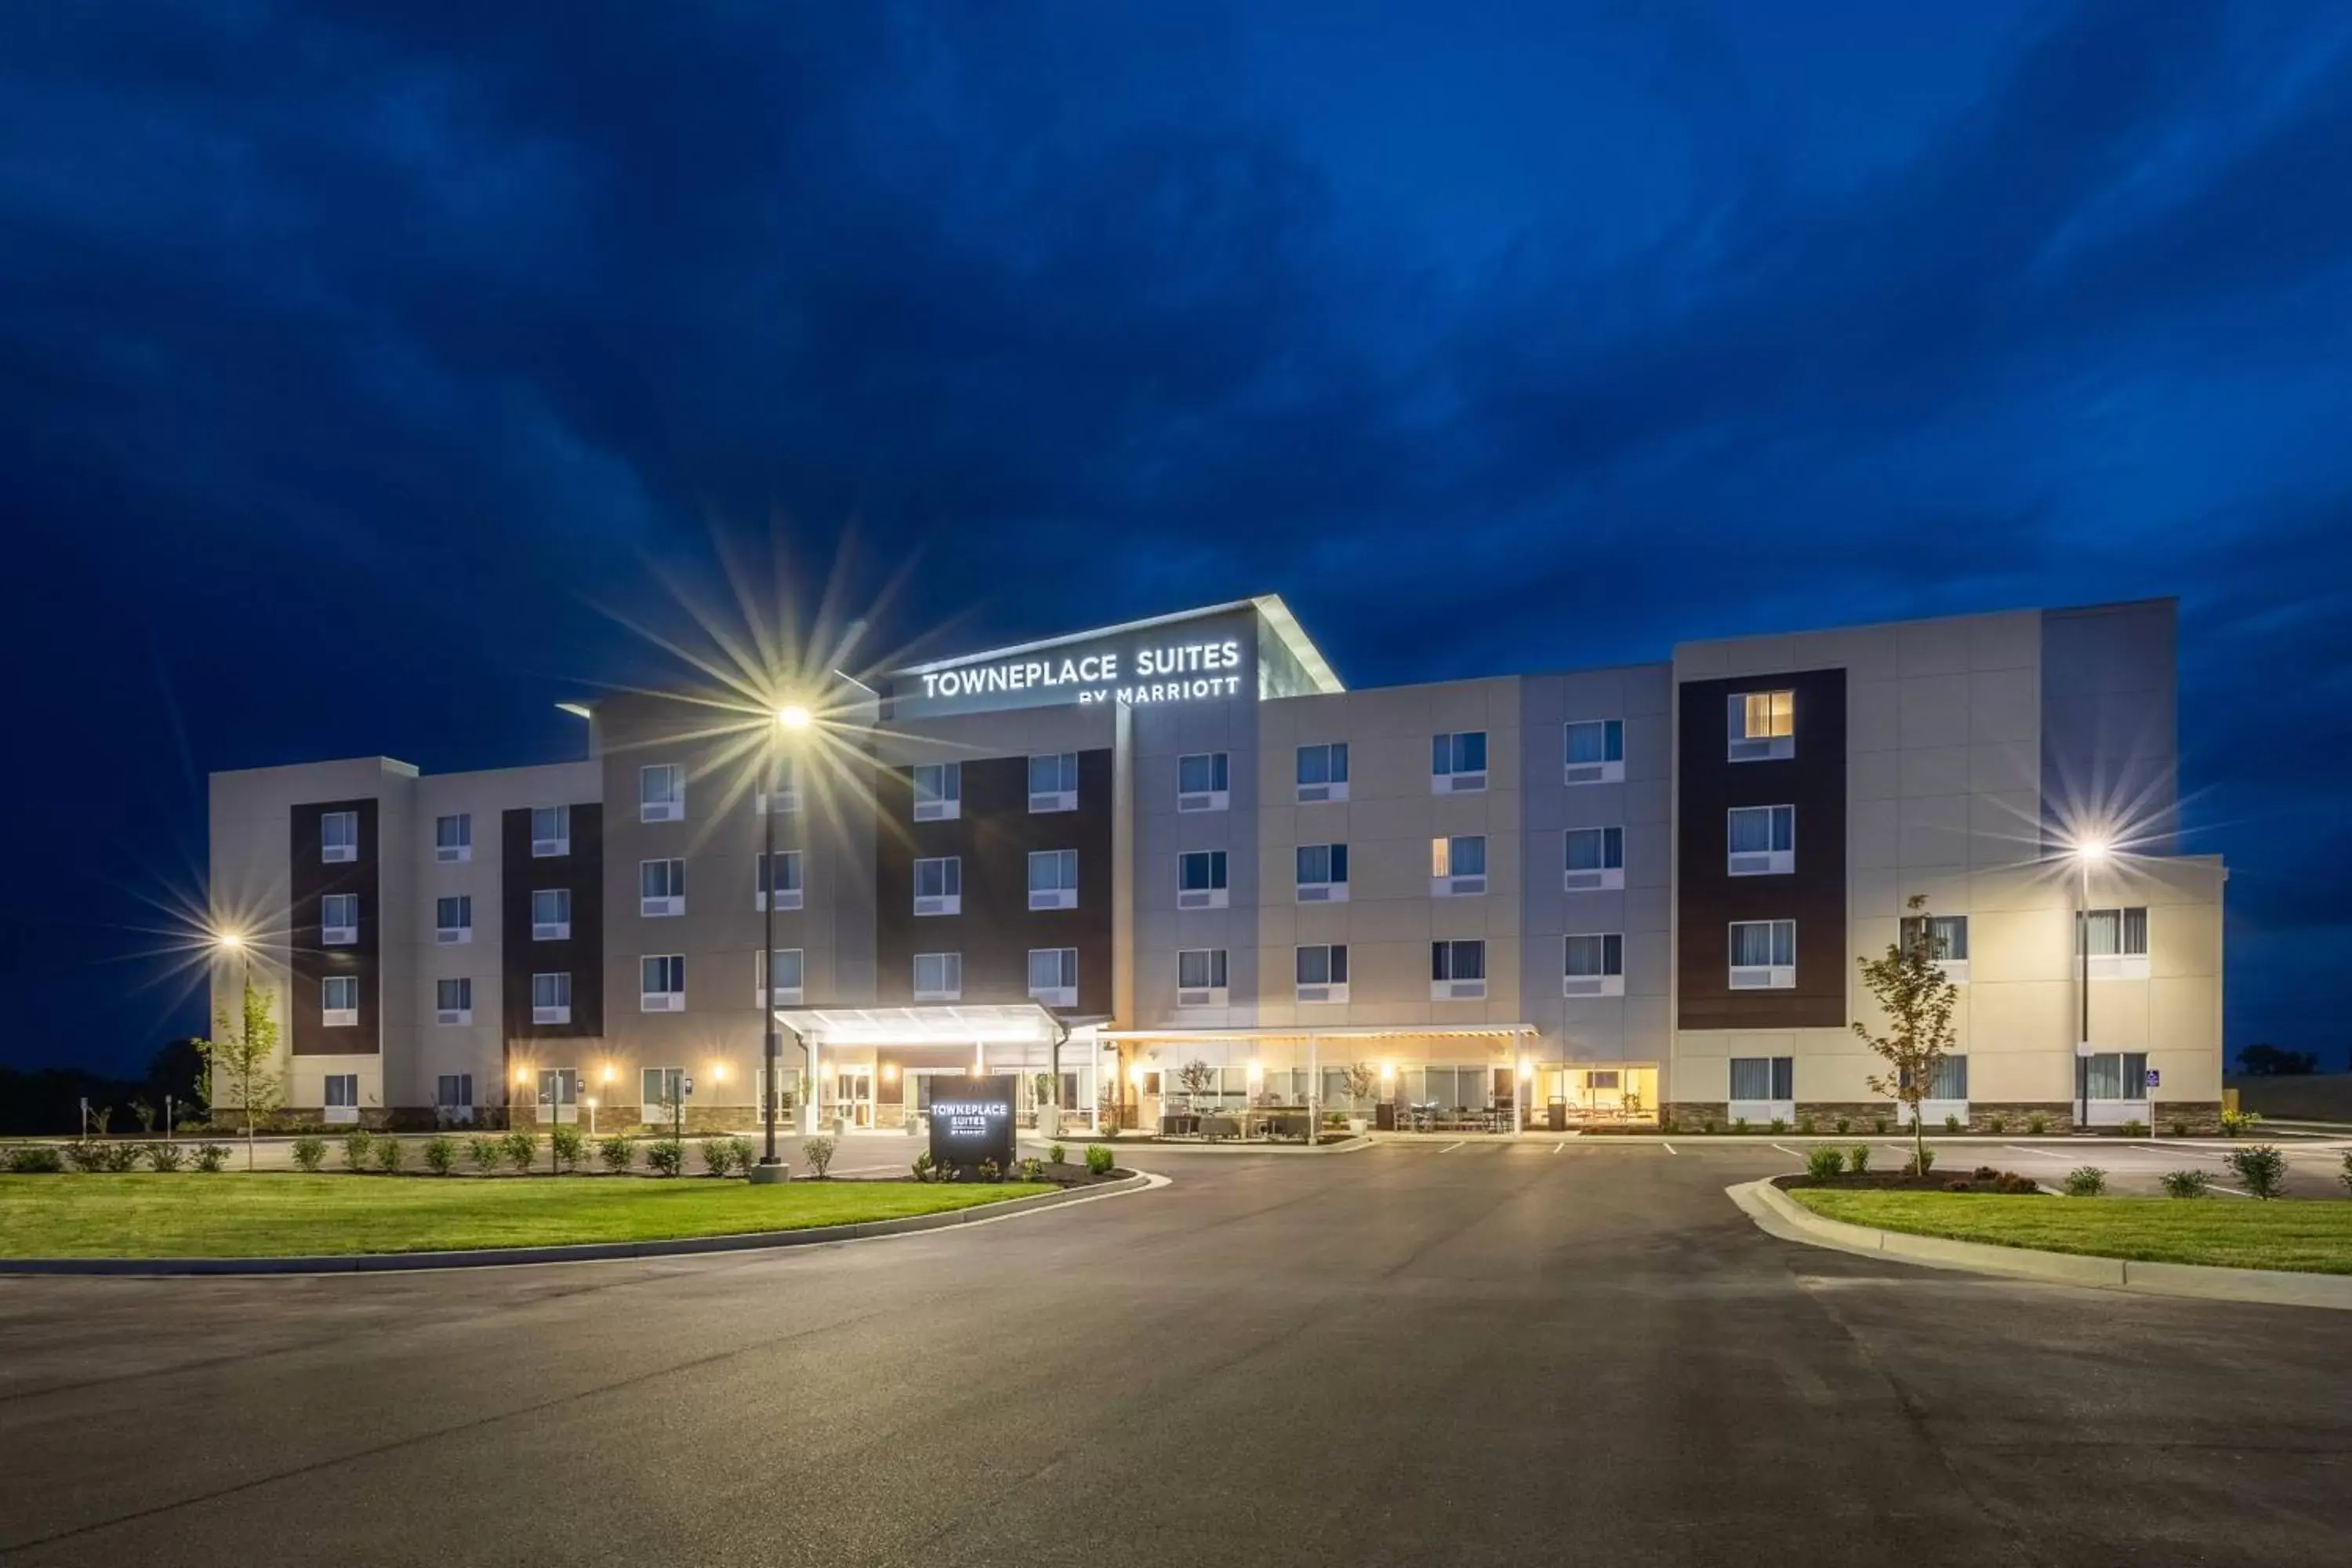 Property Building in TownePlace Suites by Marriott Owensboro